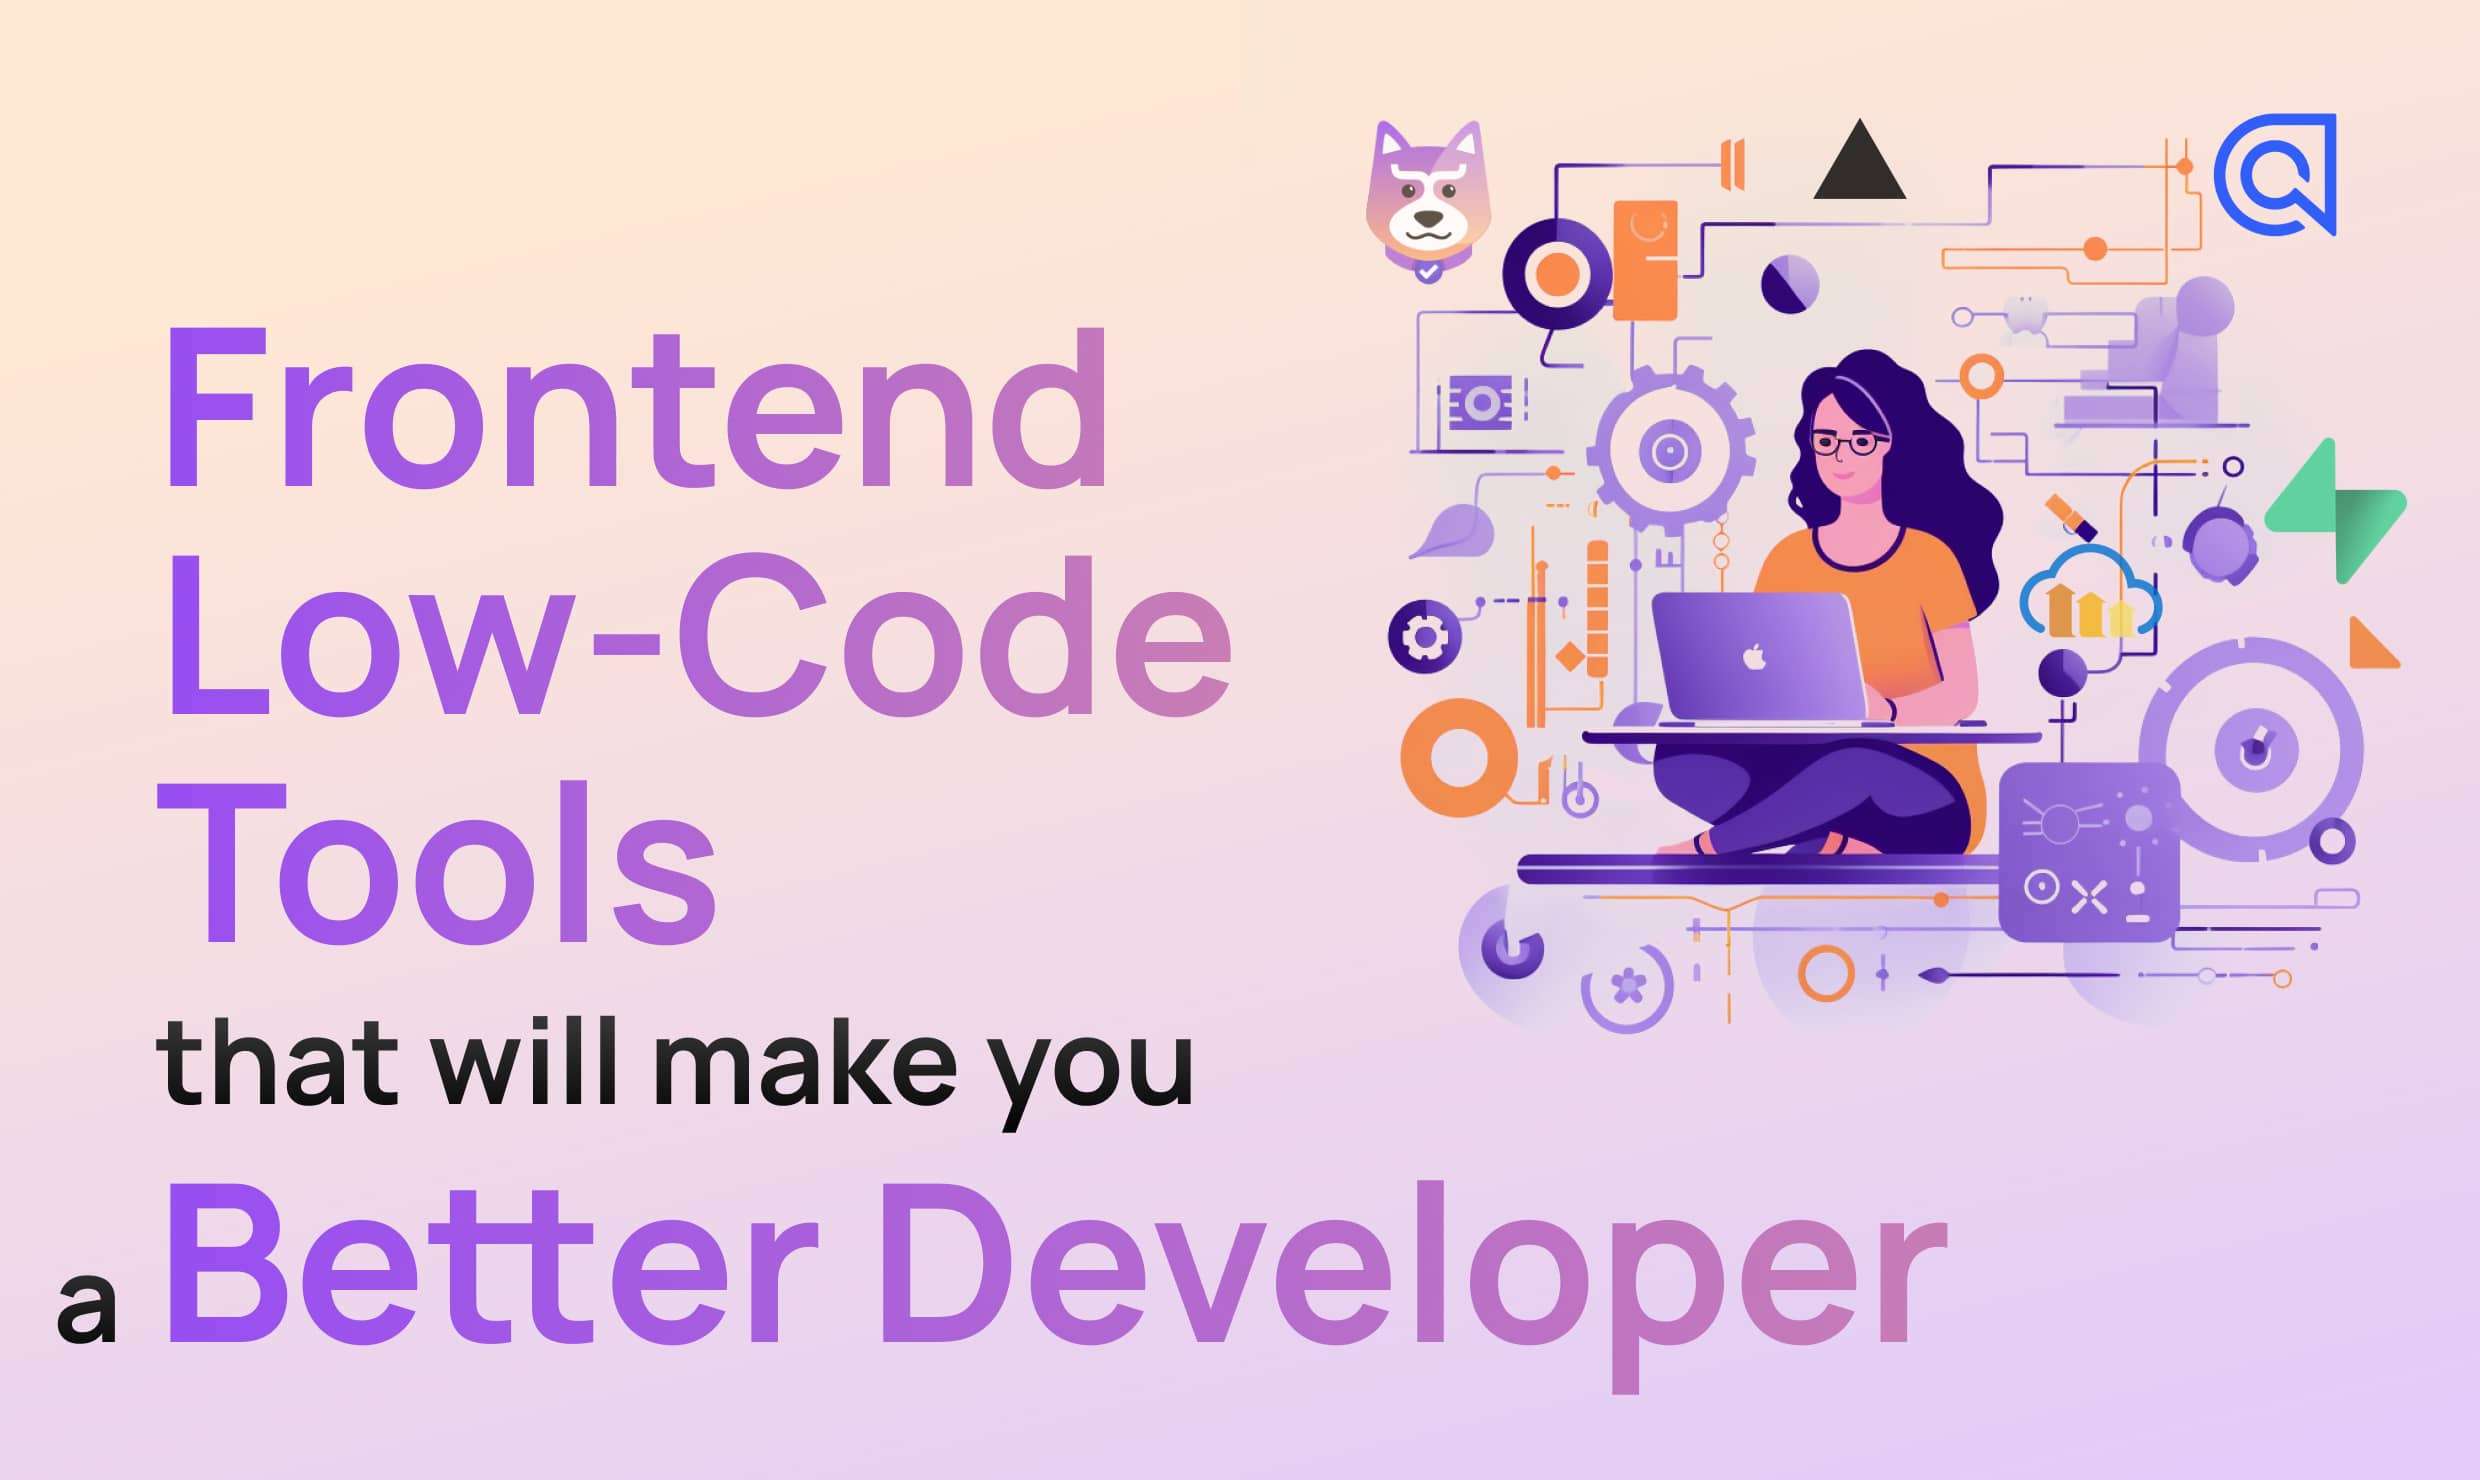 6 Low-Code Tools That Will Make You a Better Frontend Developer